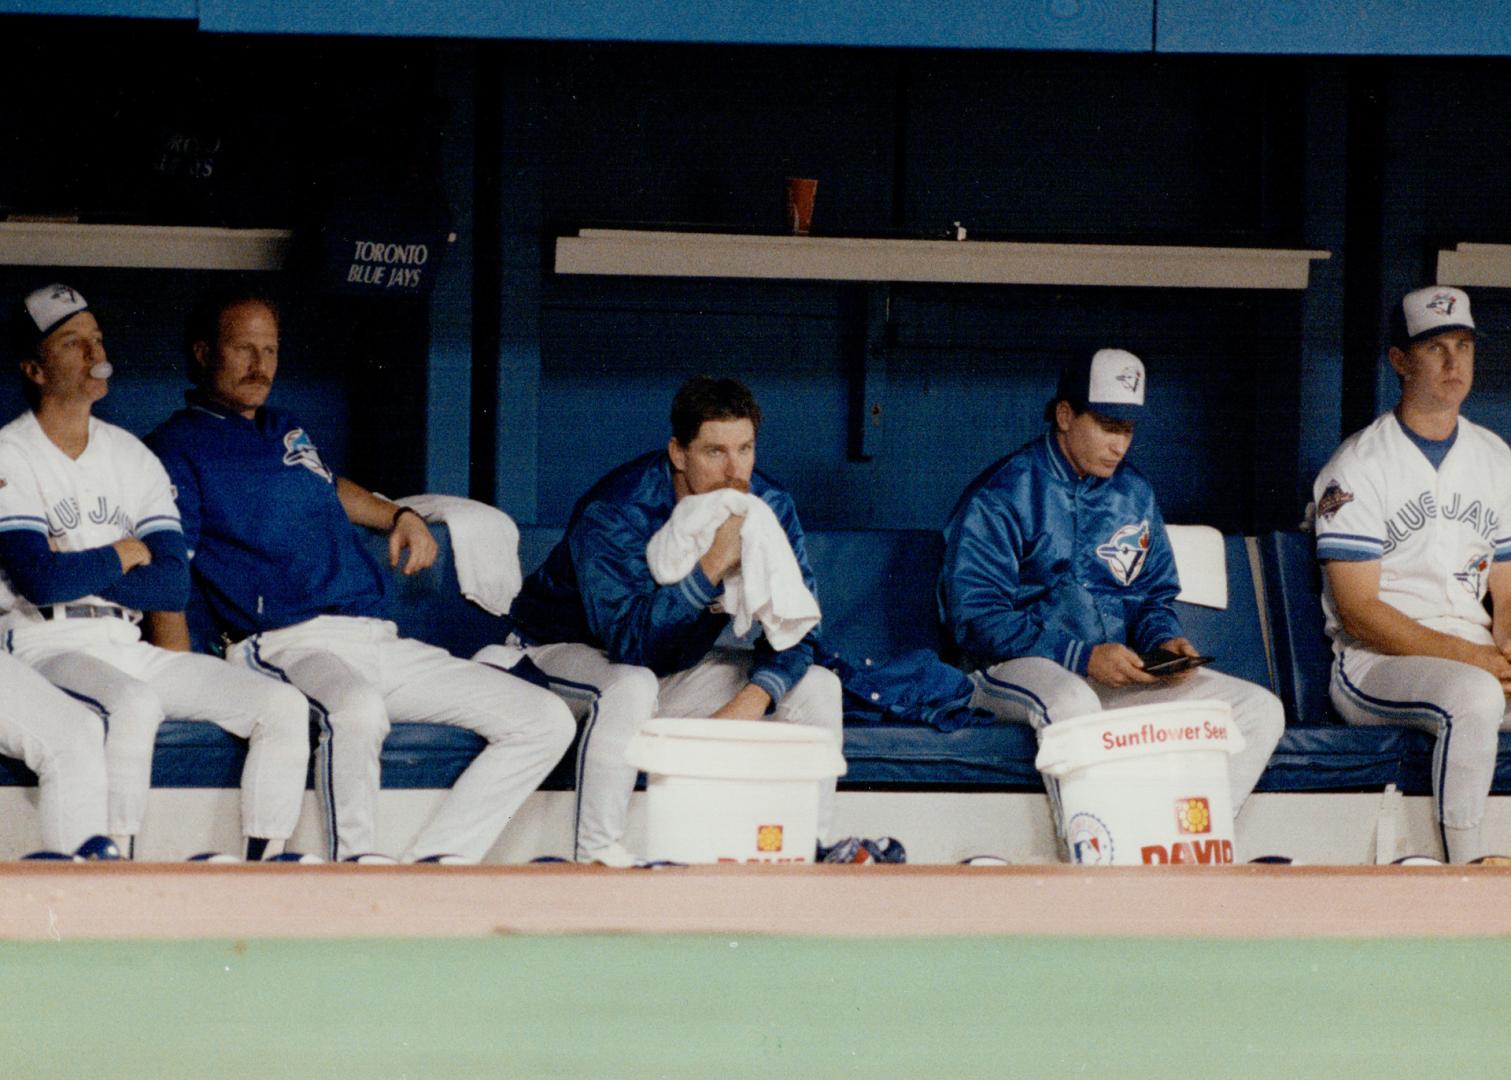 Blue night for jays: Starter Jack Morris, centre, and the rest of the Toronto Blue Jays bench had little to cheer about as Atlanta rose up for a big 7-2 win